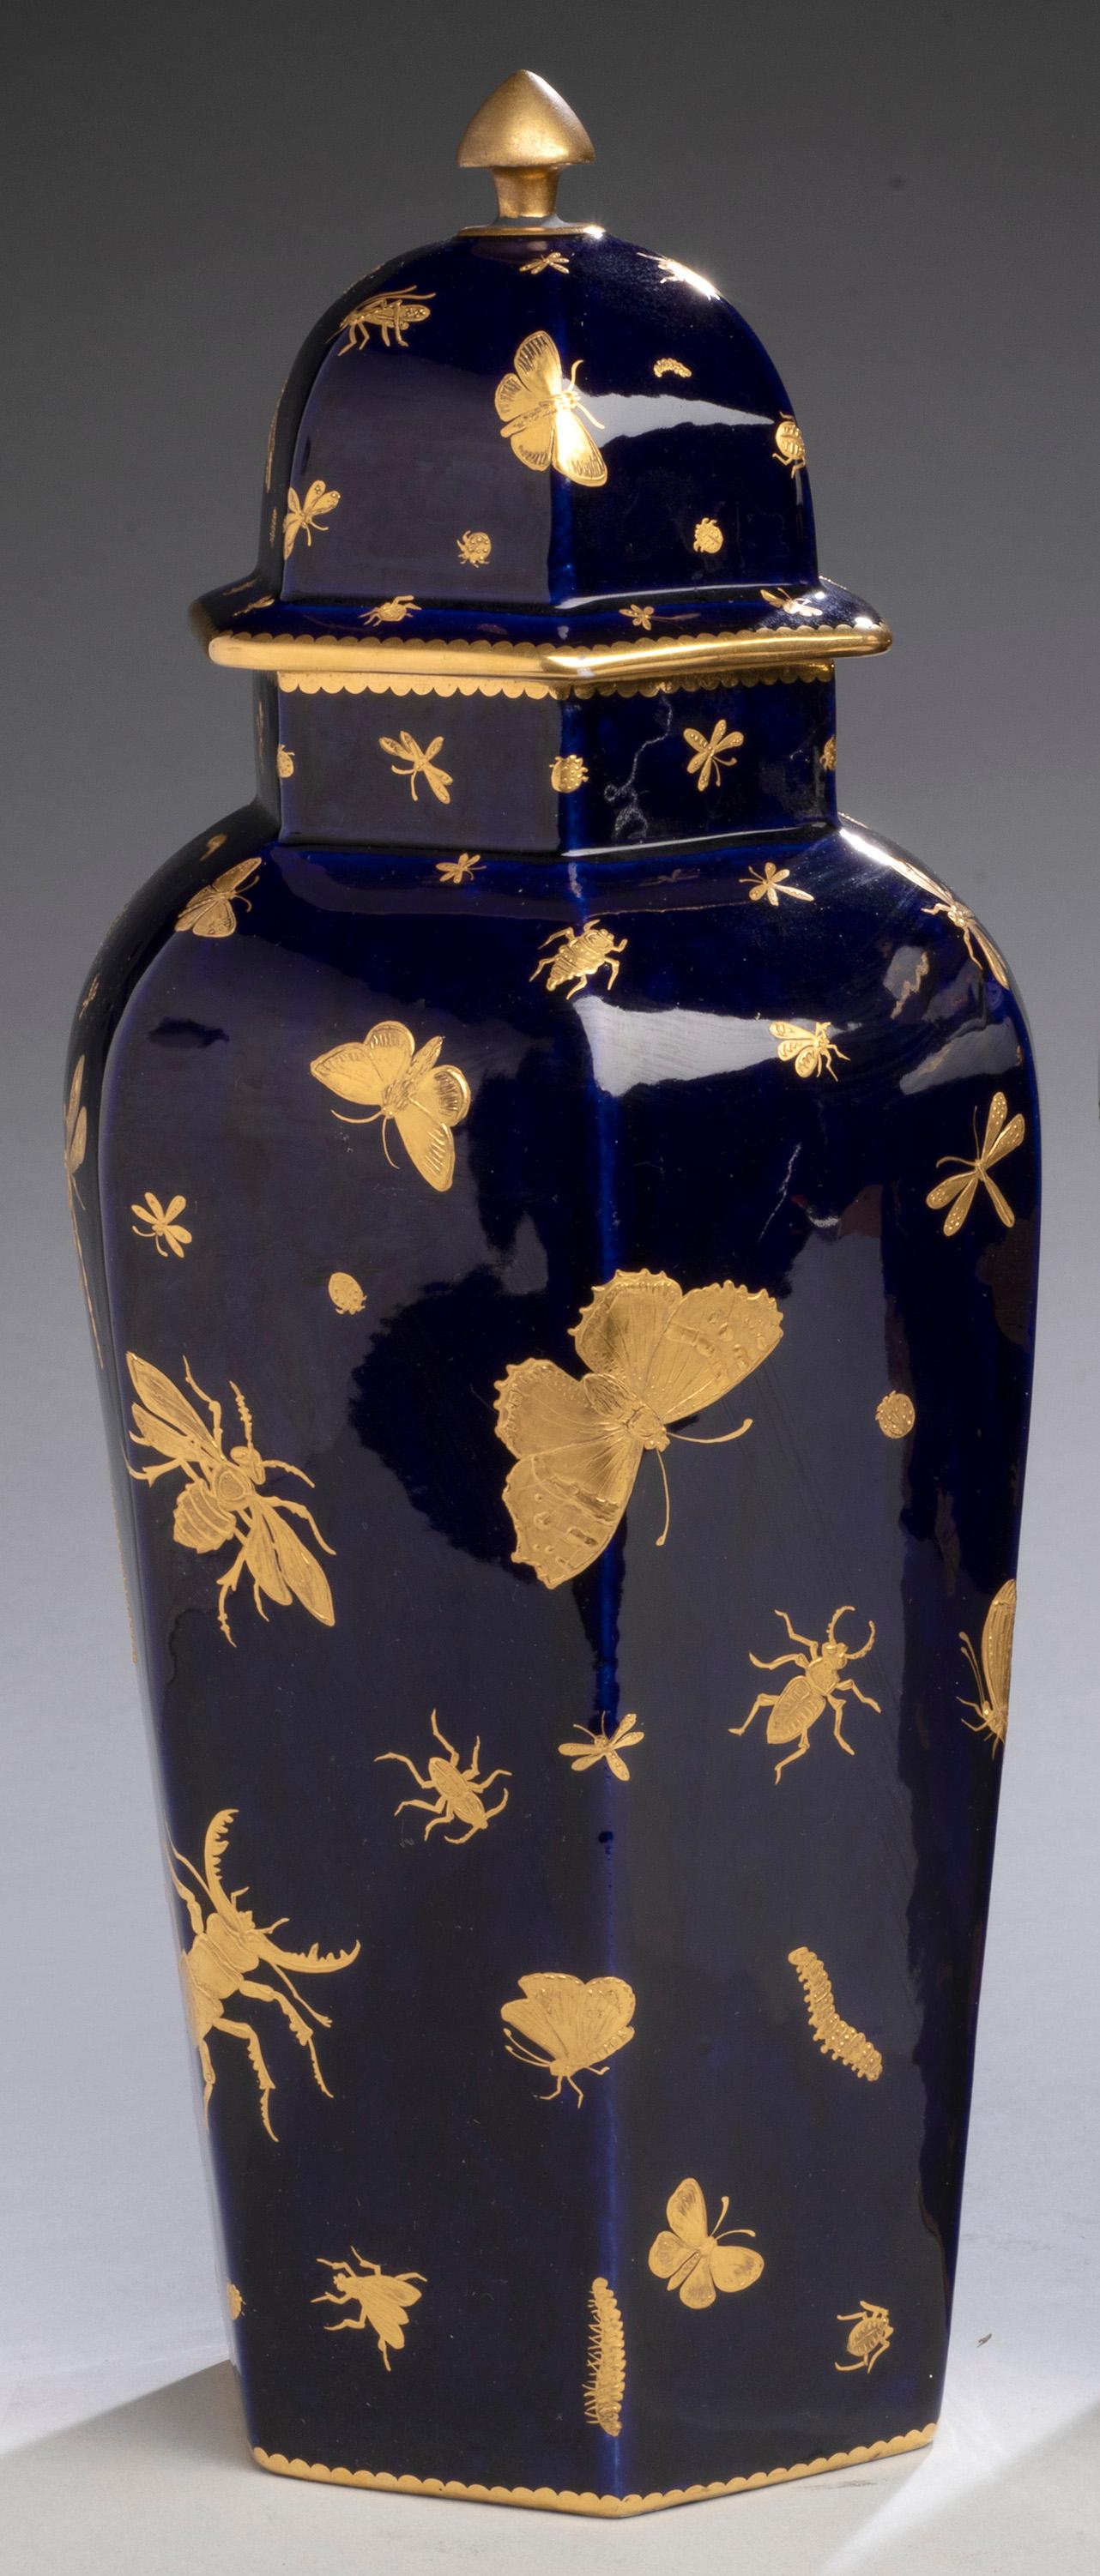 Pair of English Porcelain Vases with Insects from John Mortlock circa 1875 - Victorian Art by Unknown